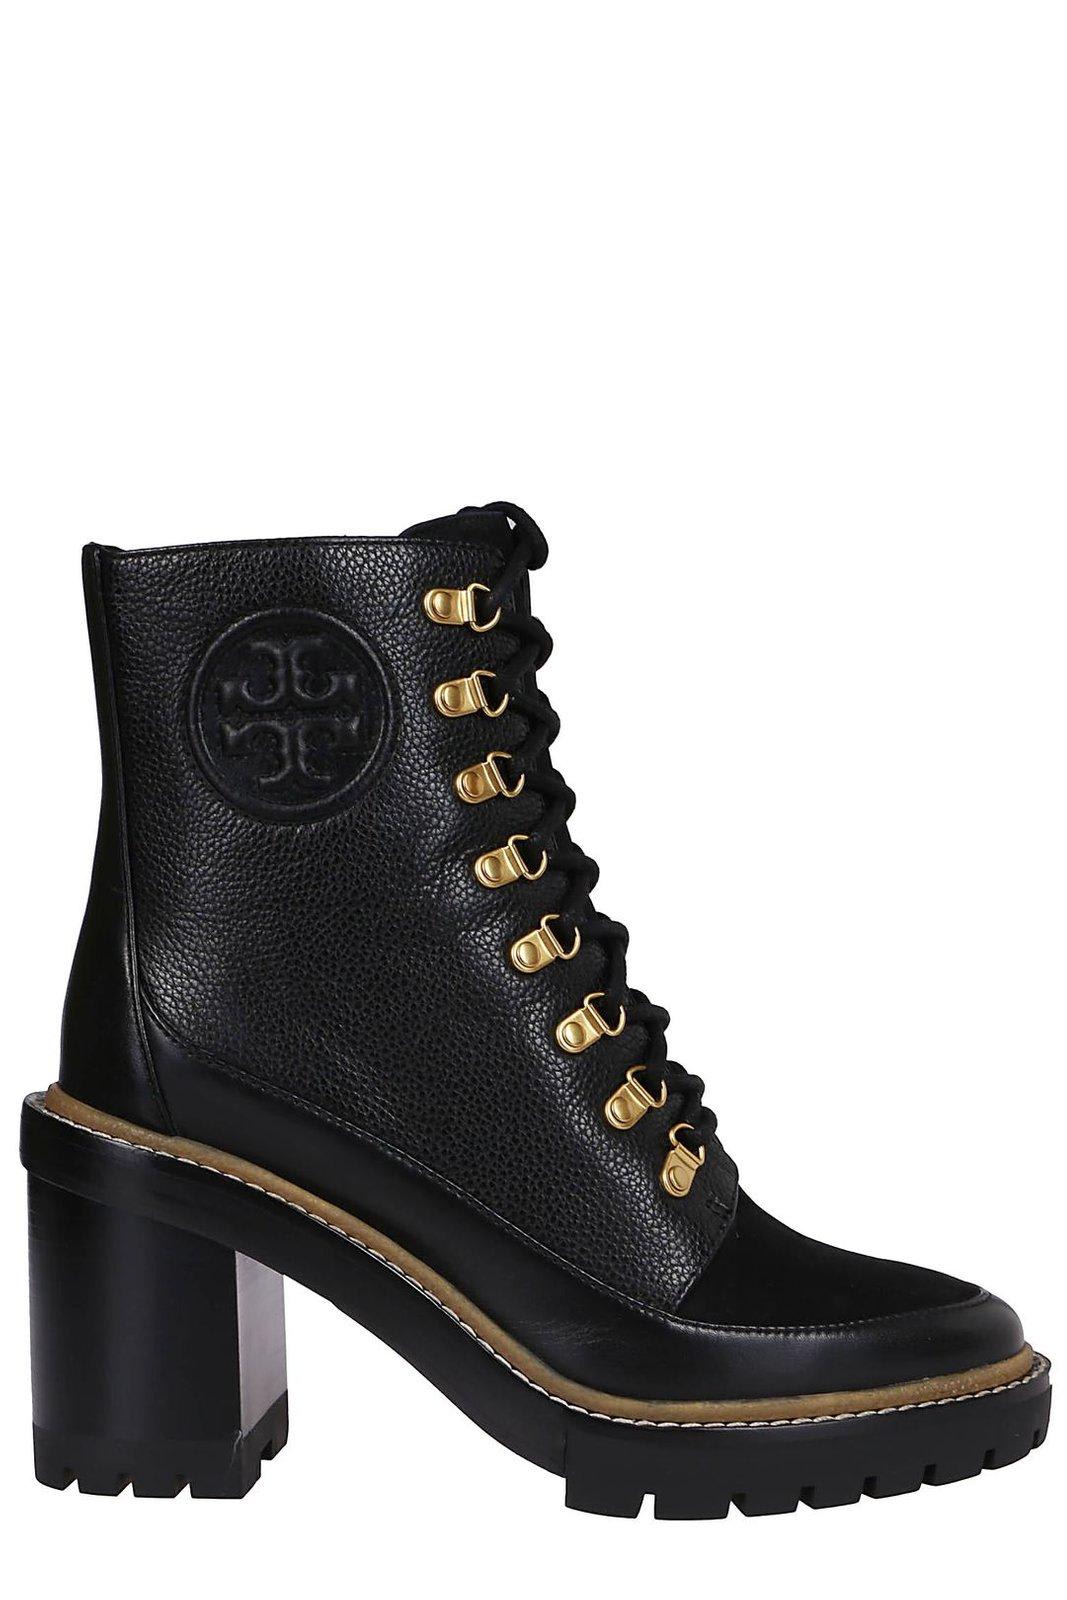 Tory Burch Miller Lace-up Boots